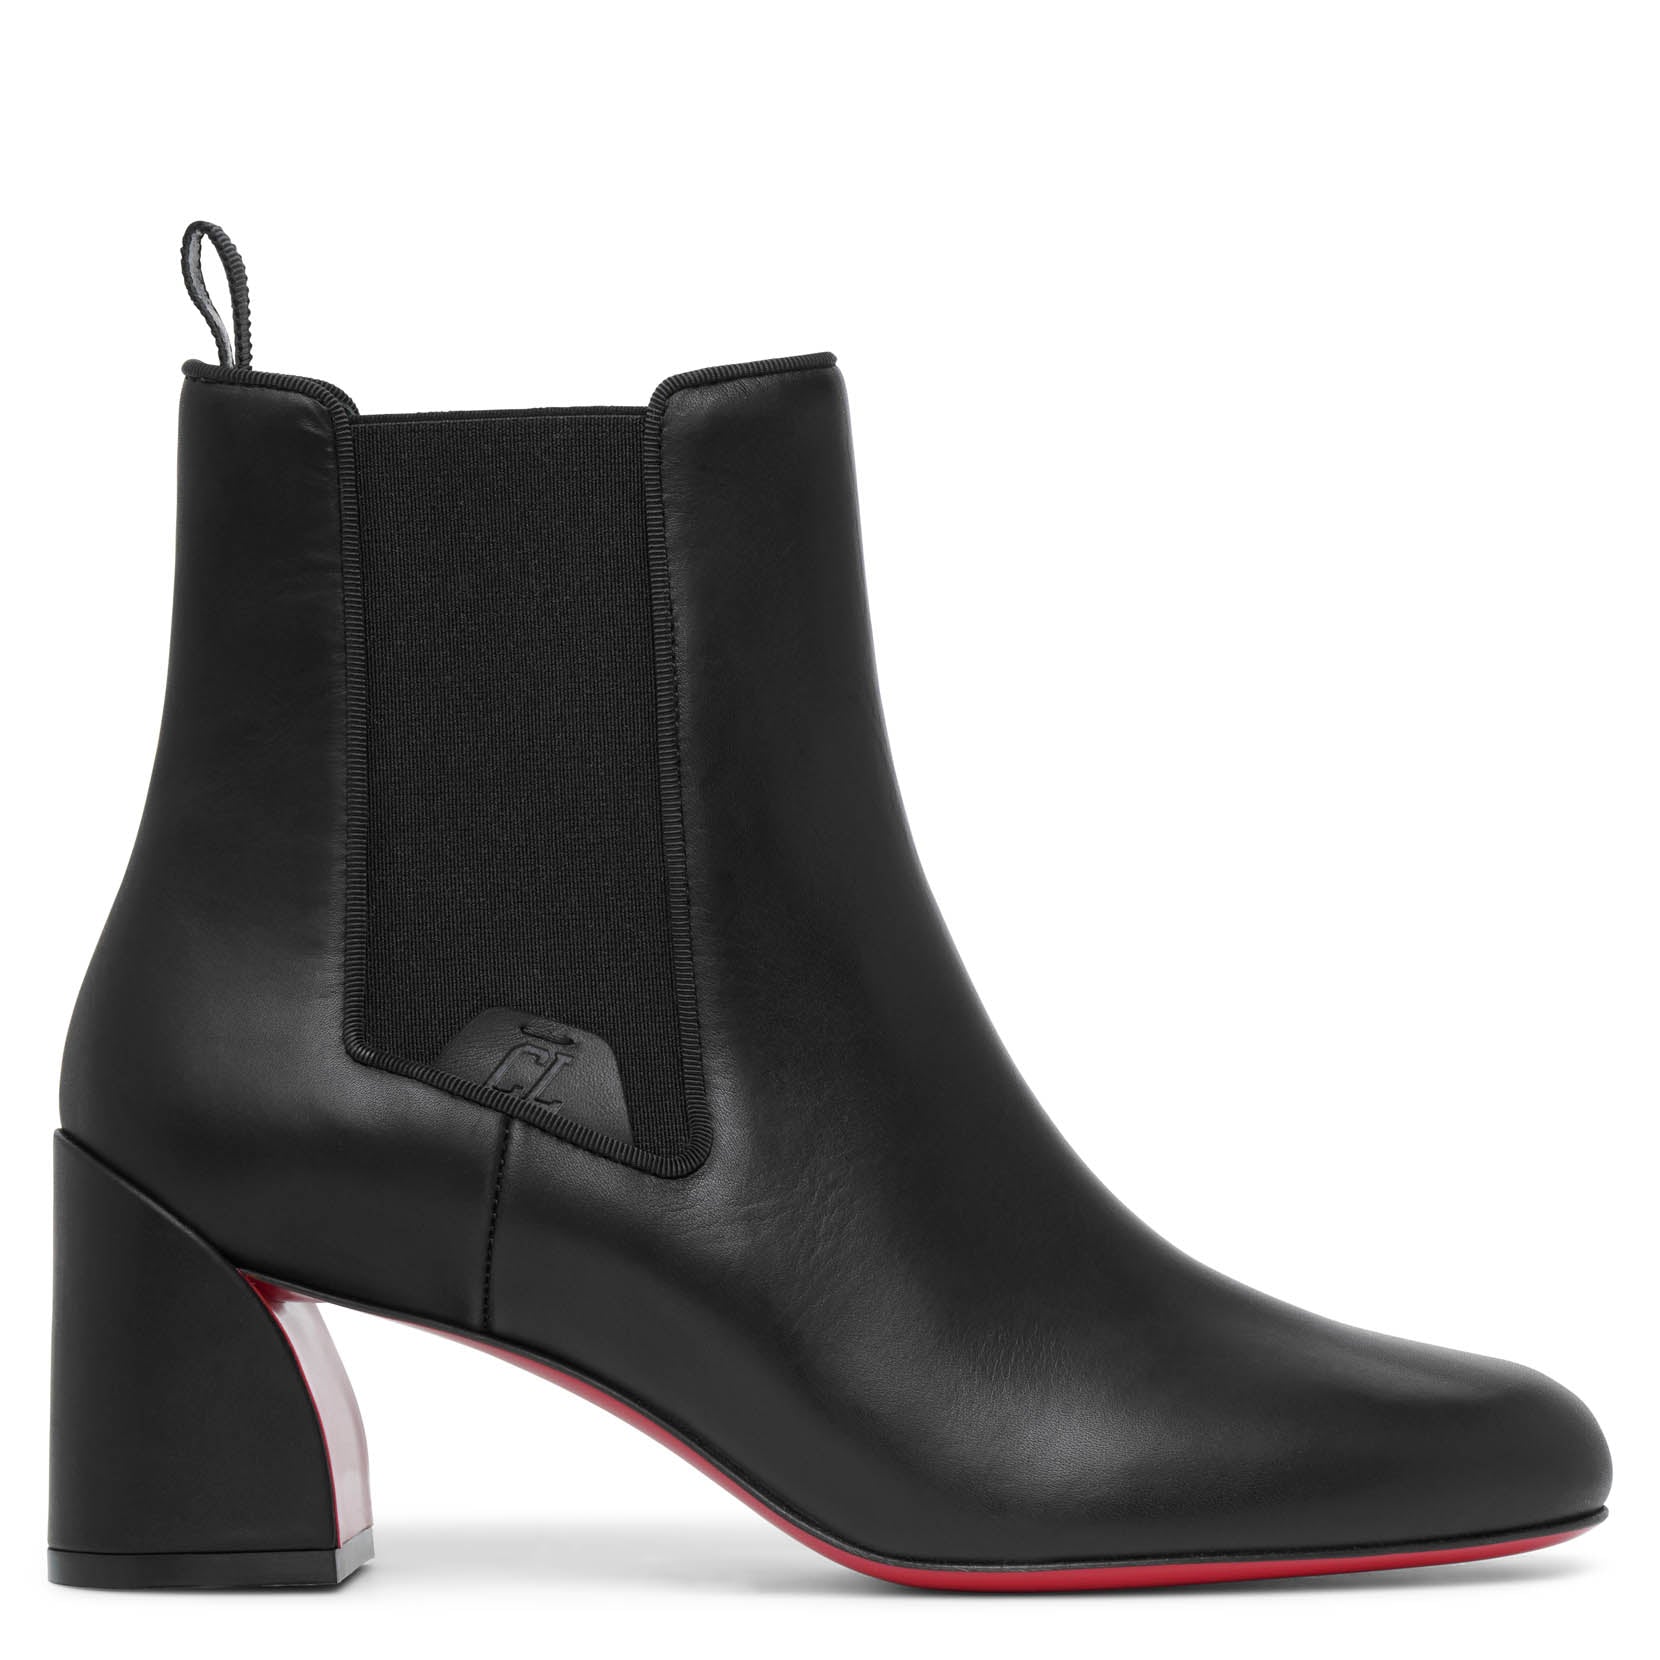 CHRISTIAN LOUBOUTIN TURELASTIC 55 BLACK LEATHER ANKLE BOOTS